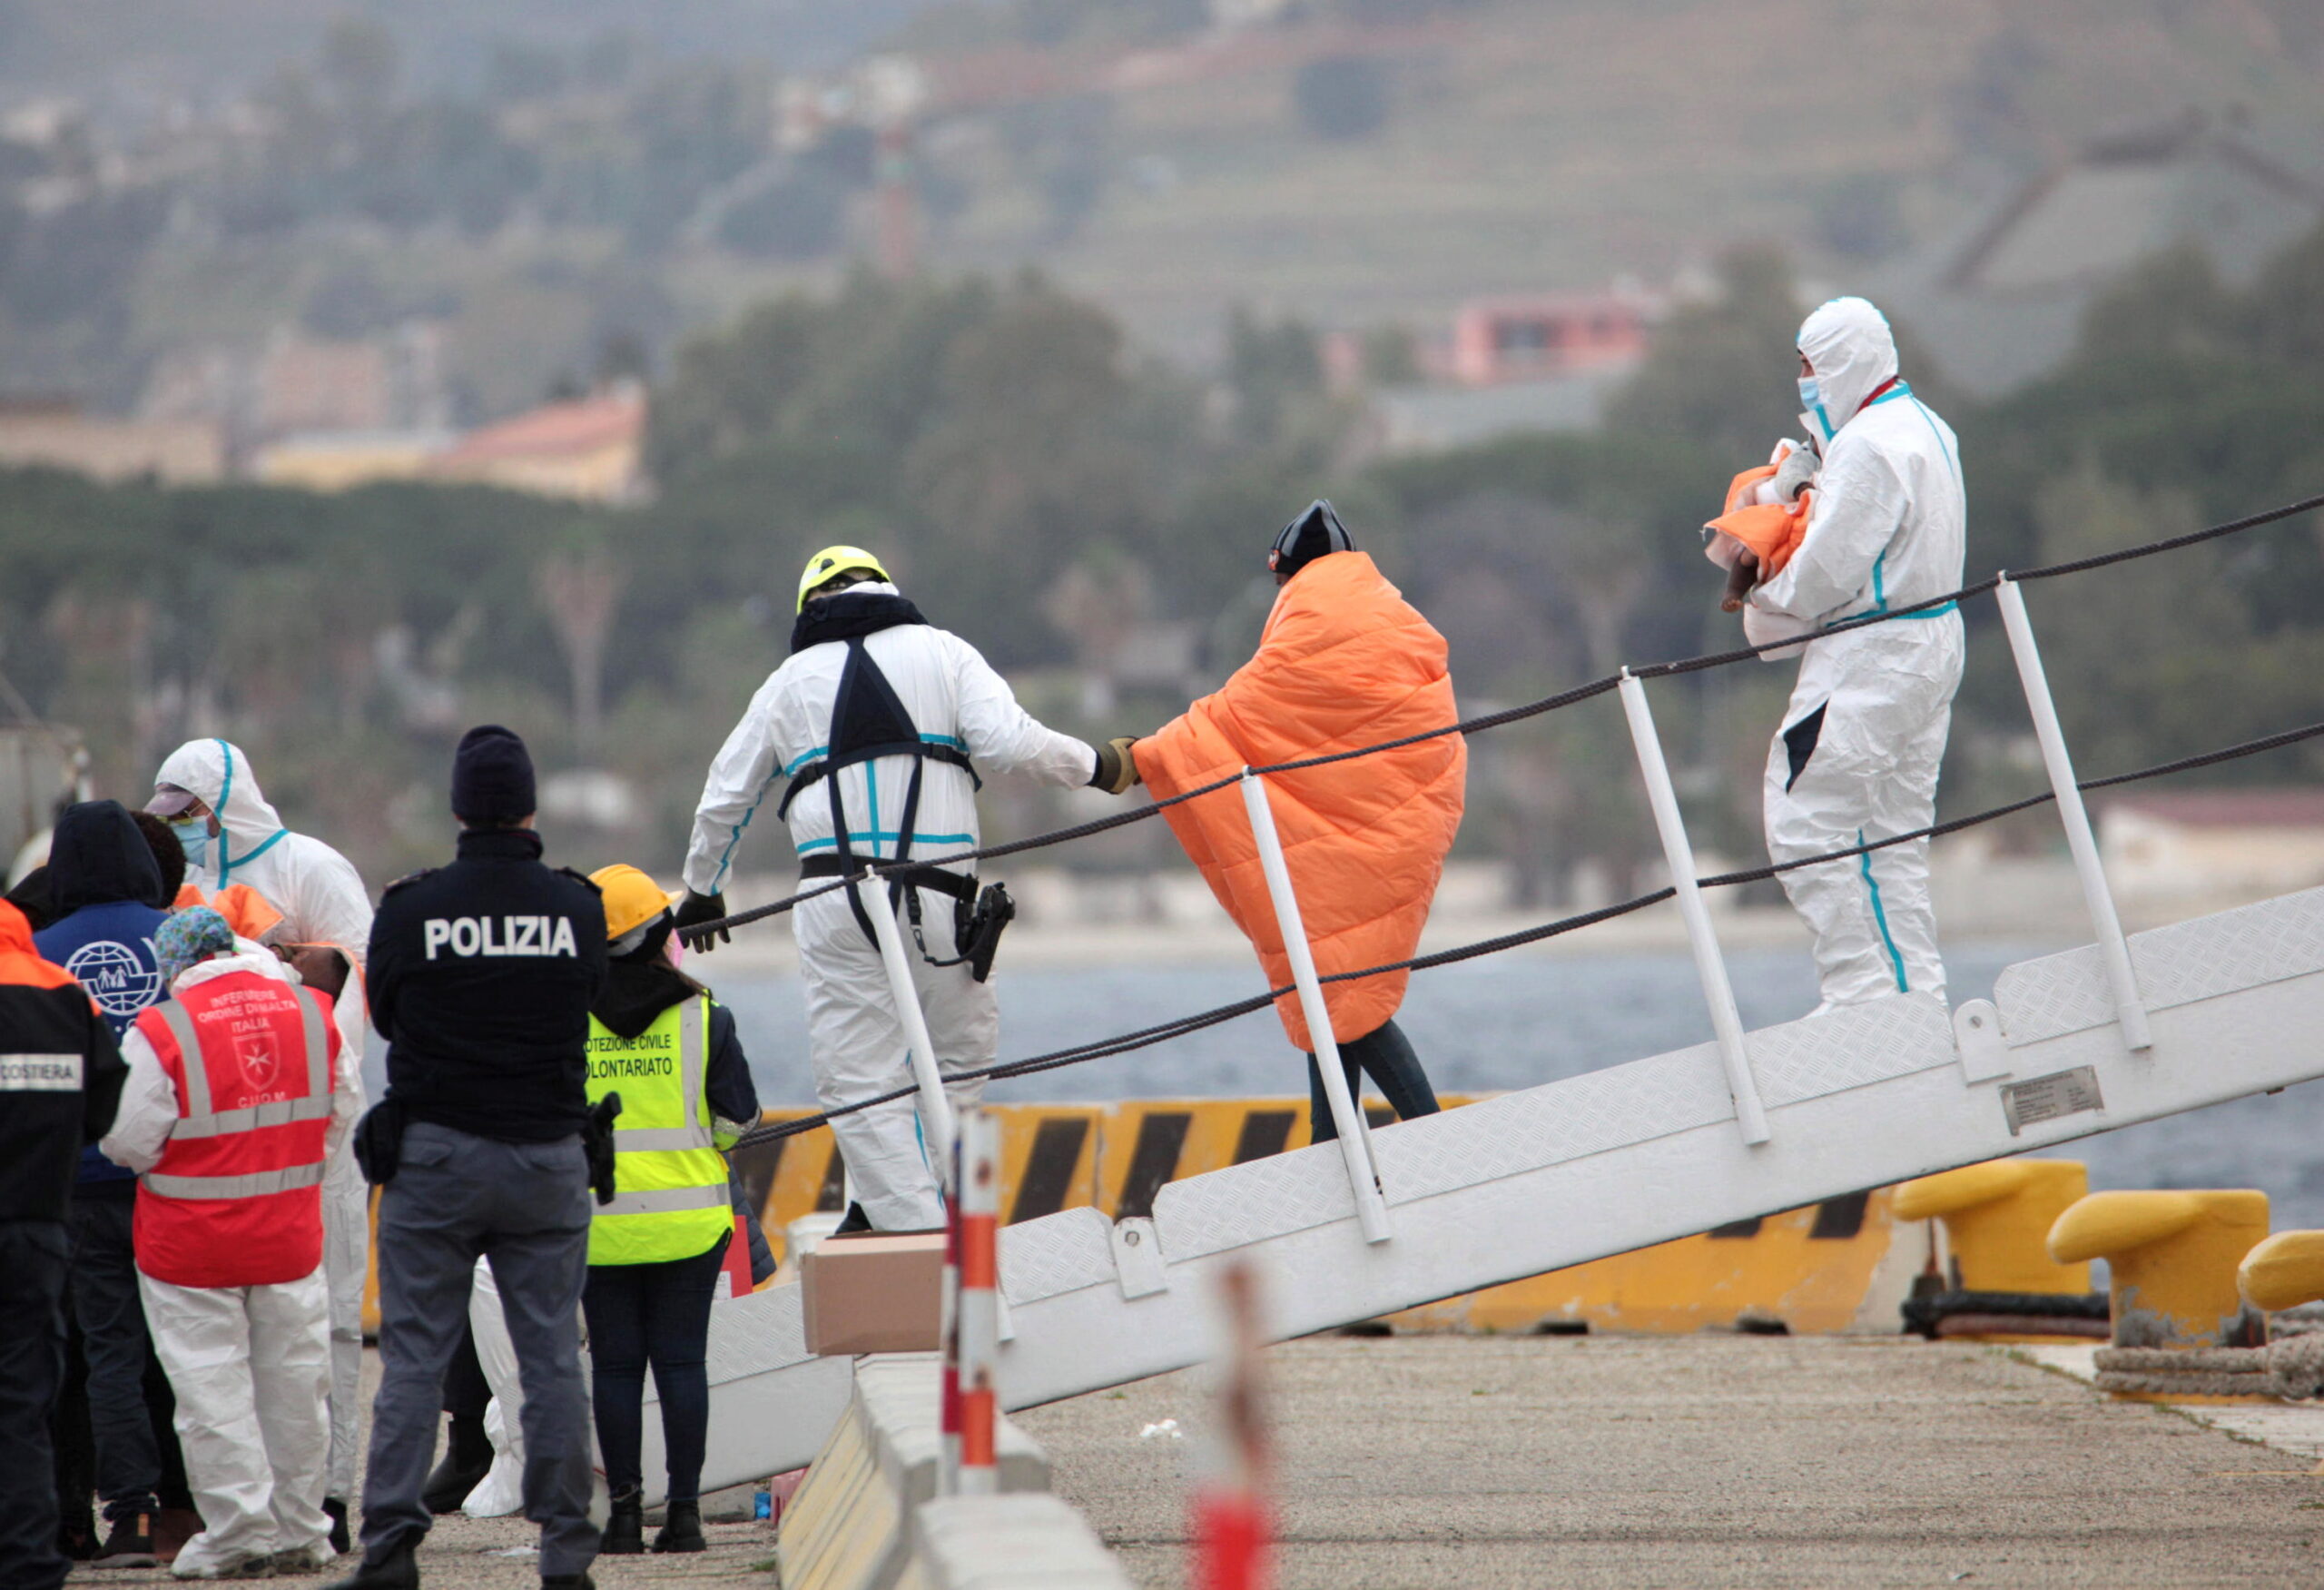 Over 580 migrants rescued at sea arrive in Reggio Calabria, southern Italy